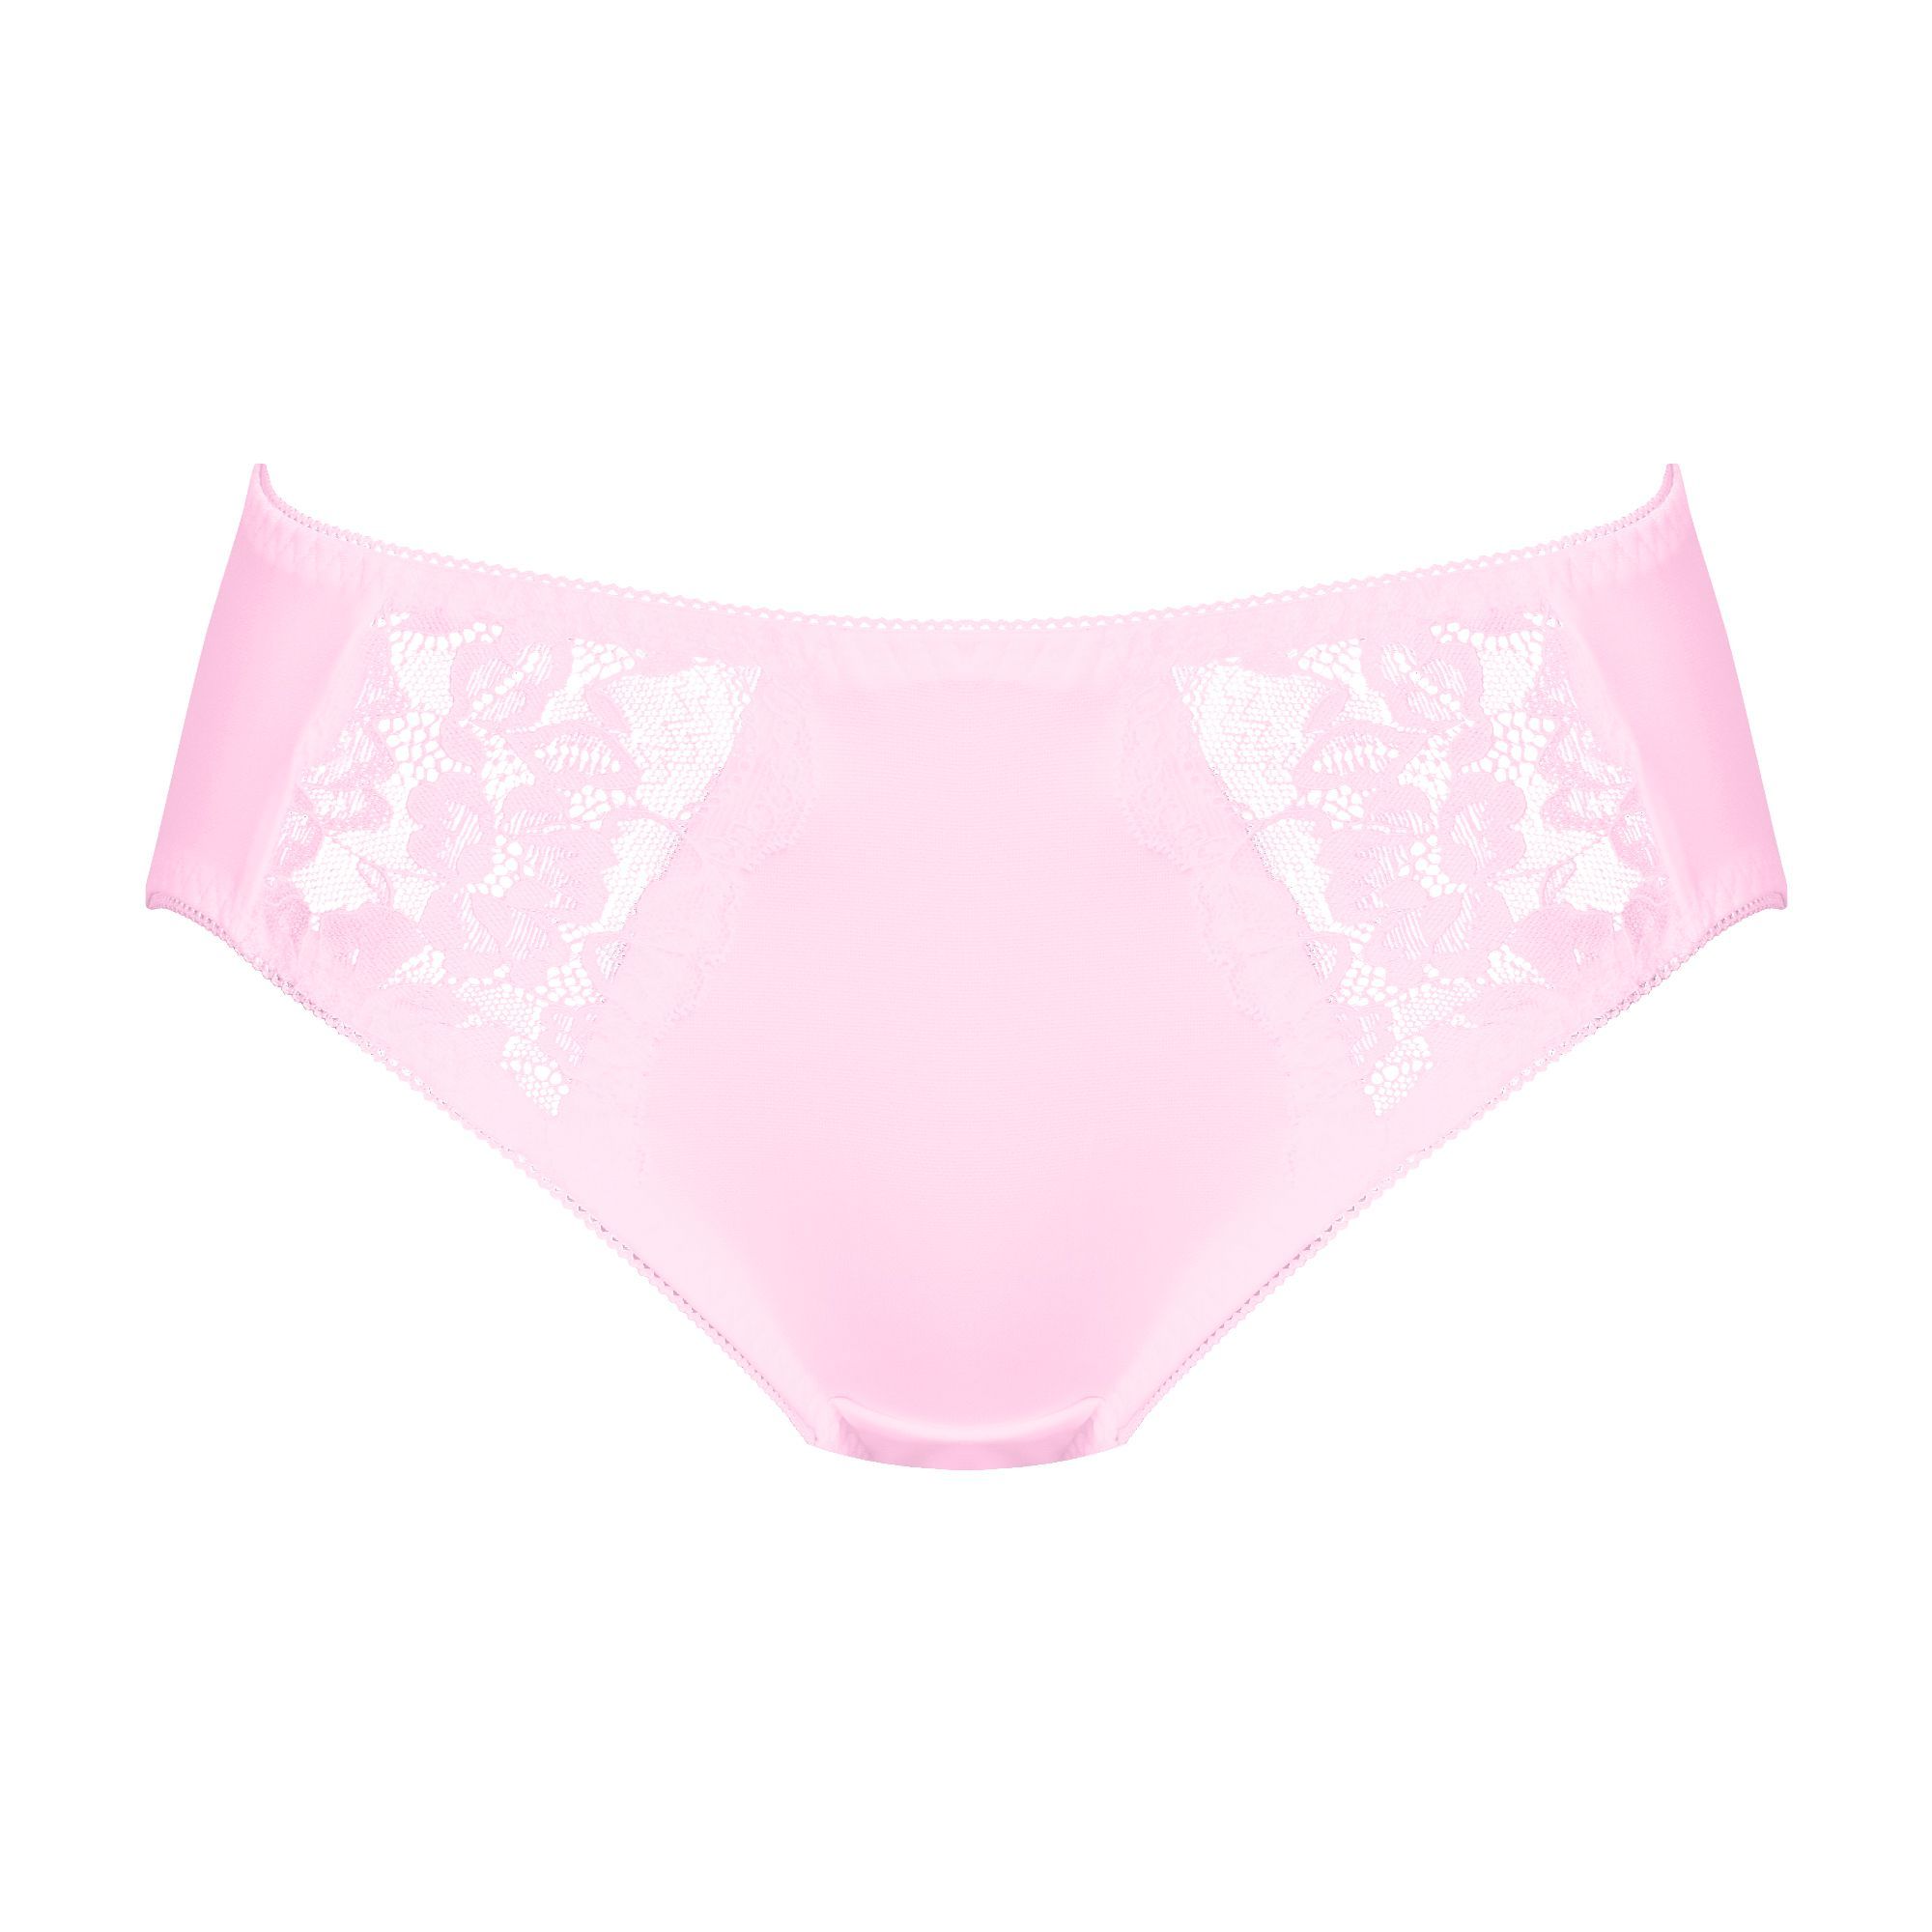 IFG Trend 012 Panty for women buy online at